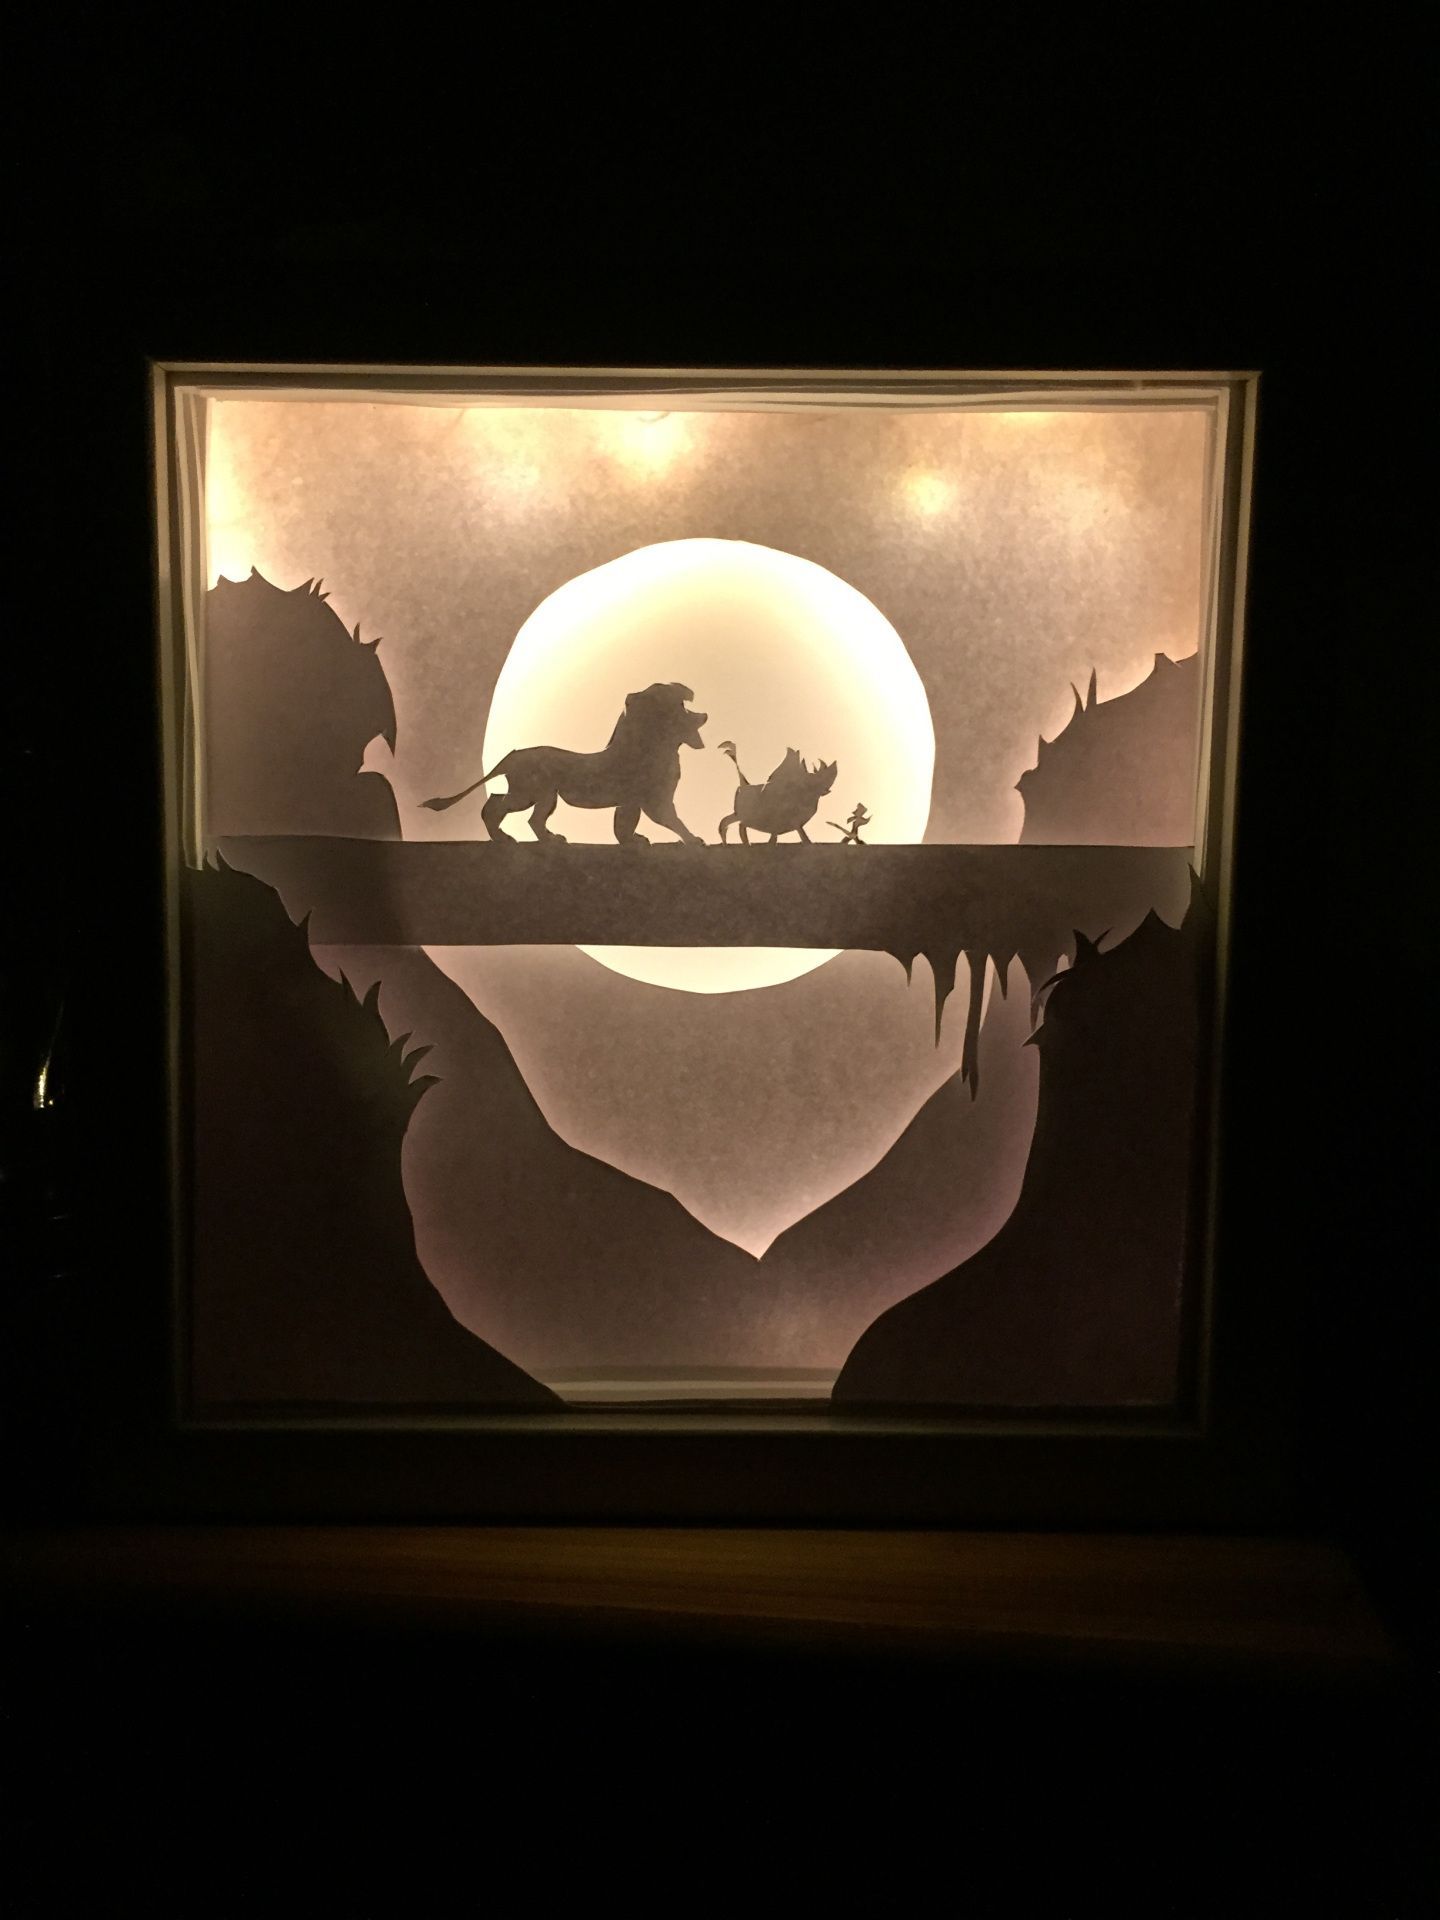 Charming 3d Shadow Box Ideas For Wall Art Inspirations | Shadow Box Art Throughout Best And Newest Shadow Box Wall Art (View 17 of 20)